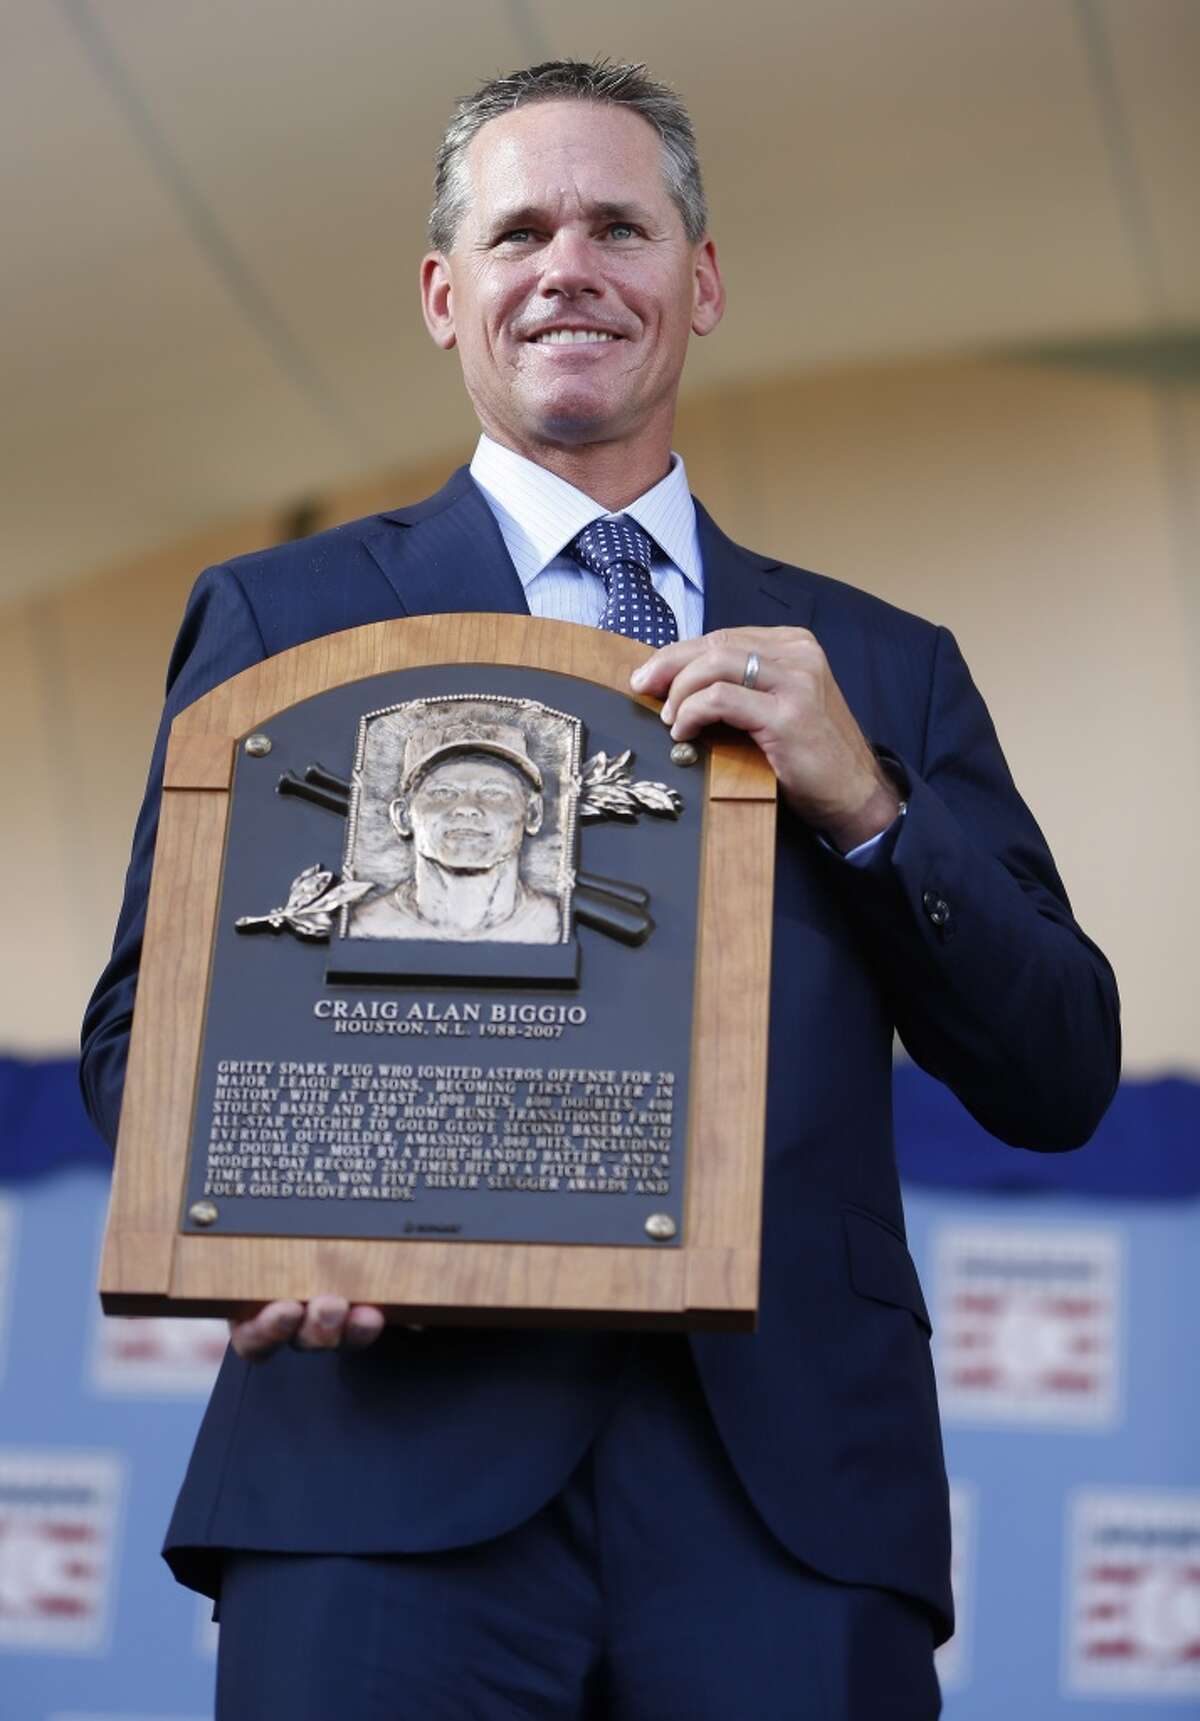 Astros logo to be used on Biggio's Hall plaque still being determined